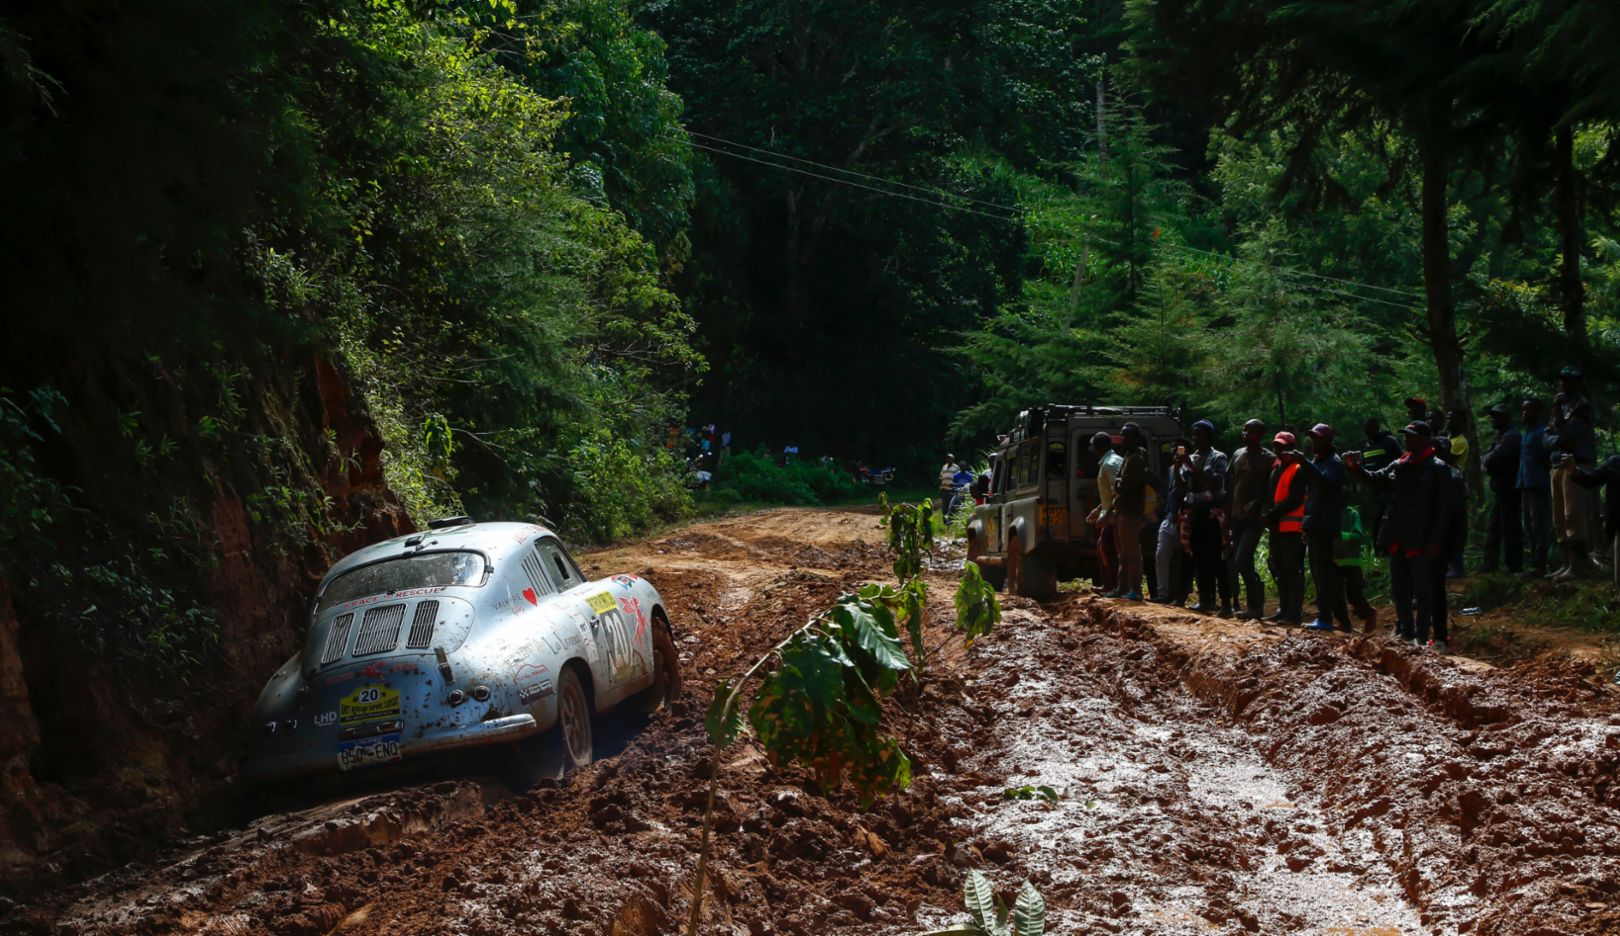 Renée Brinkerhoff overcame difficult conditions in the Porsche 356 on the first day of the East African Safari Classic Rally. In Kenya, she was cheered on by the locals. At the end of the rally, the sixth continent was conquered.